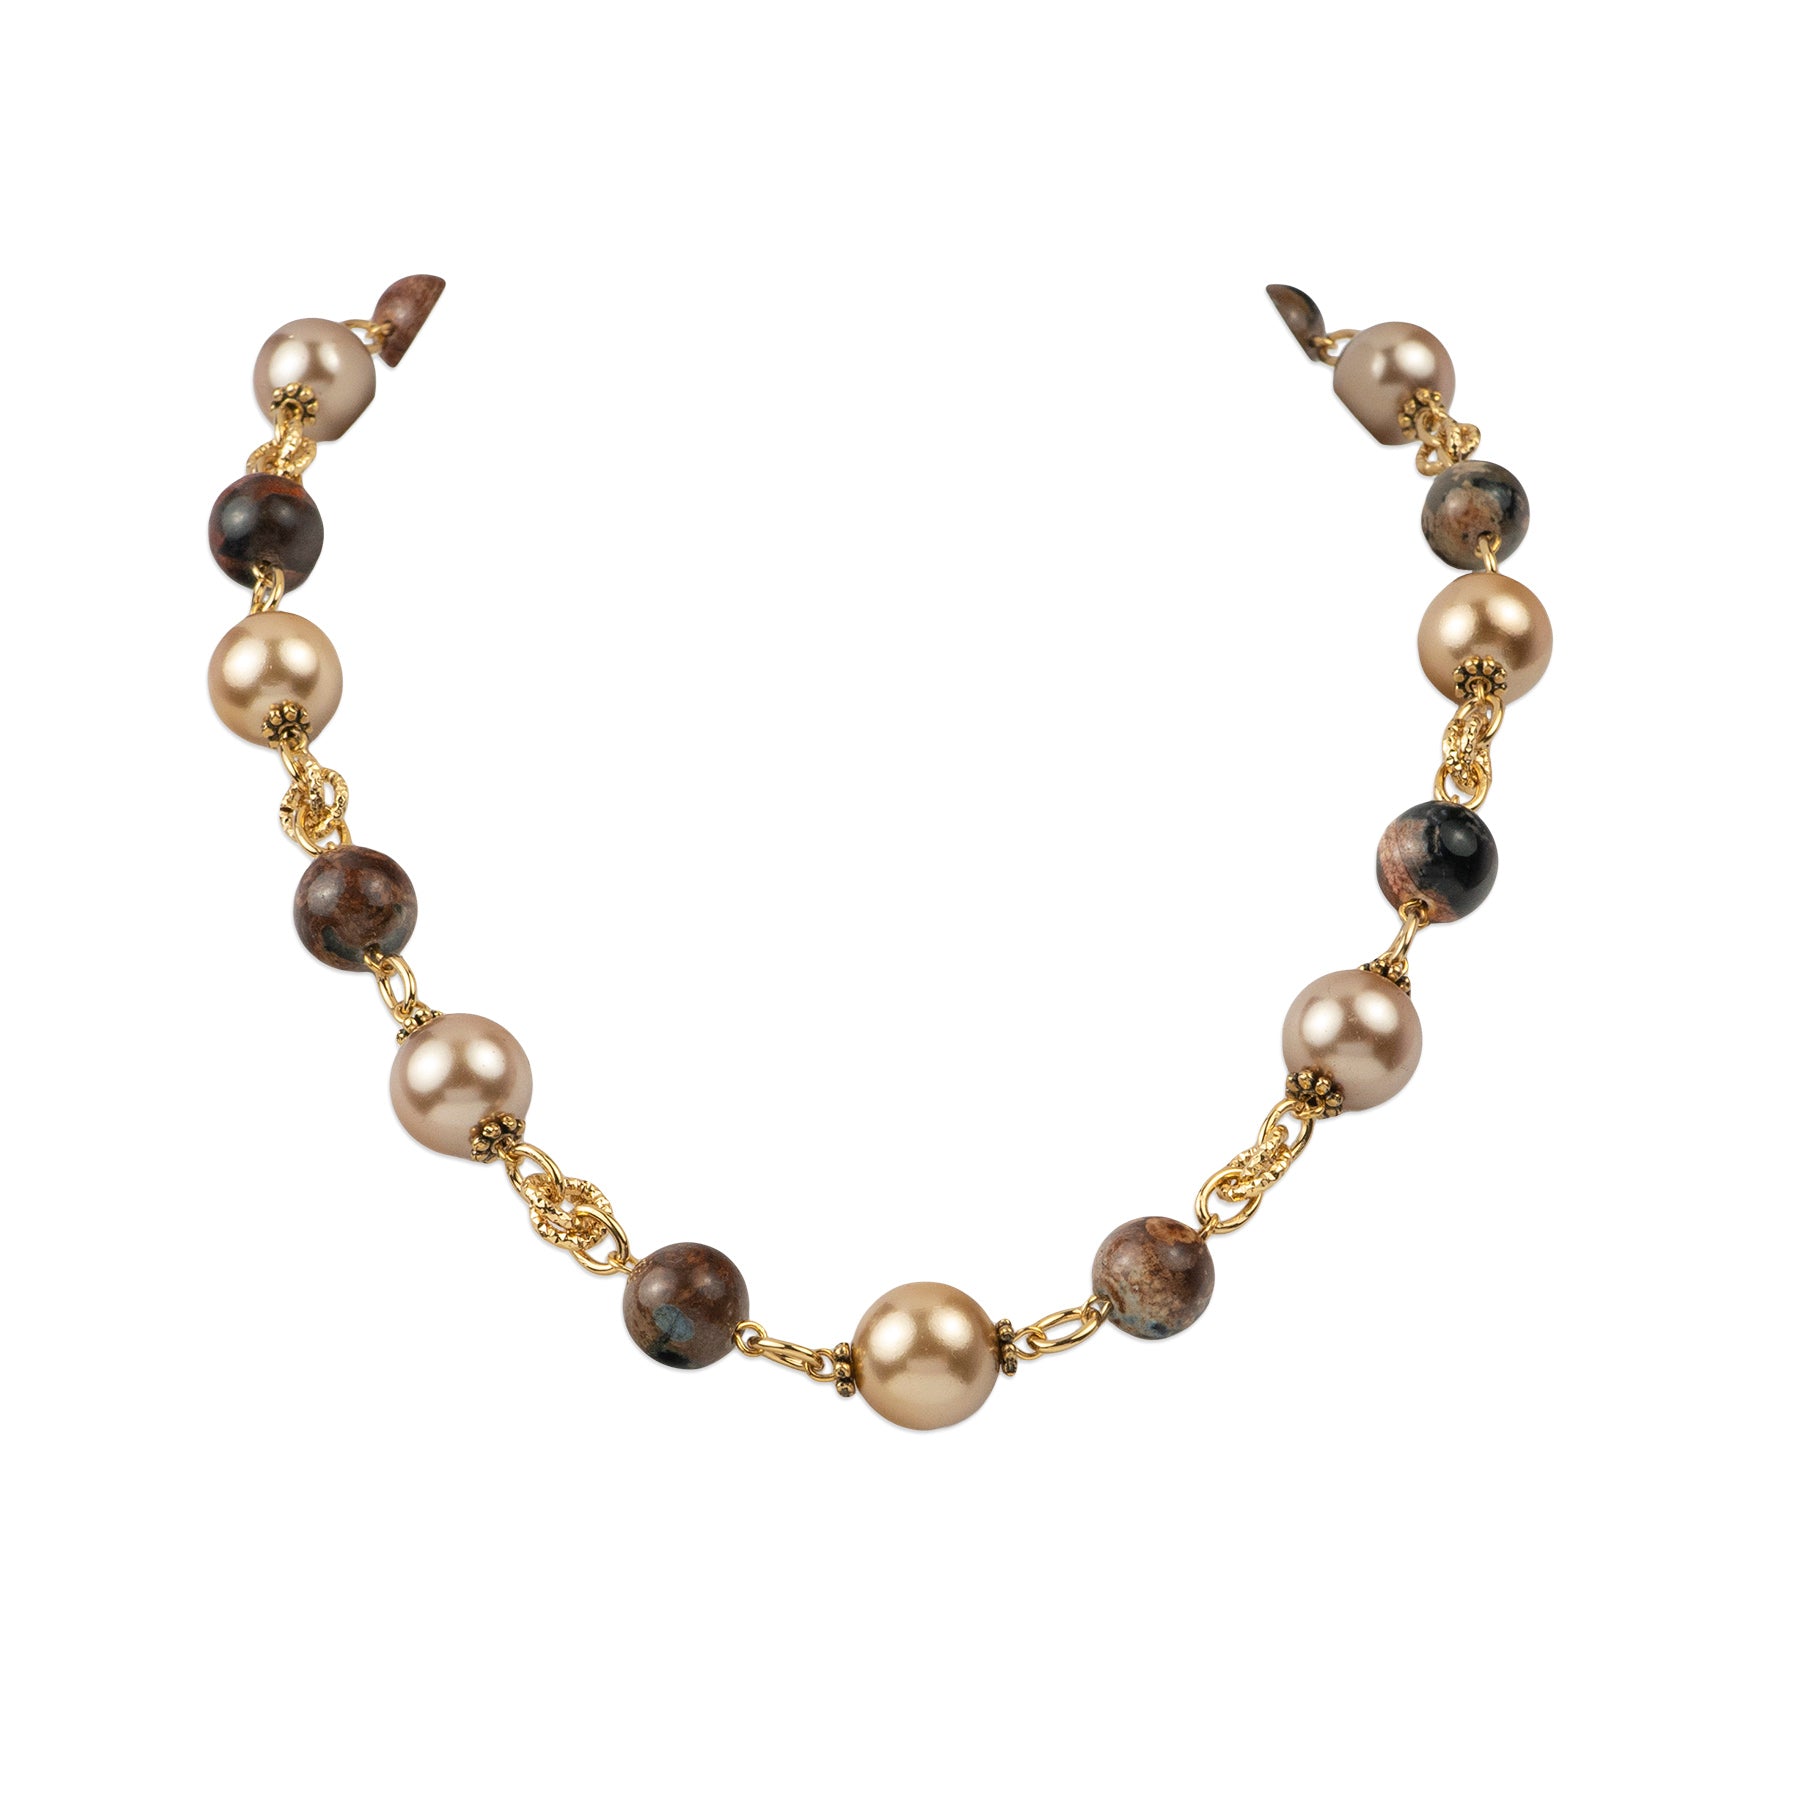 Gemstone and pearl choker necklace